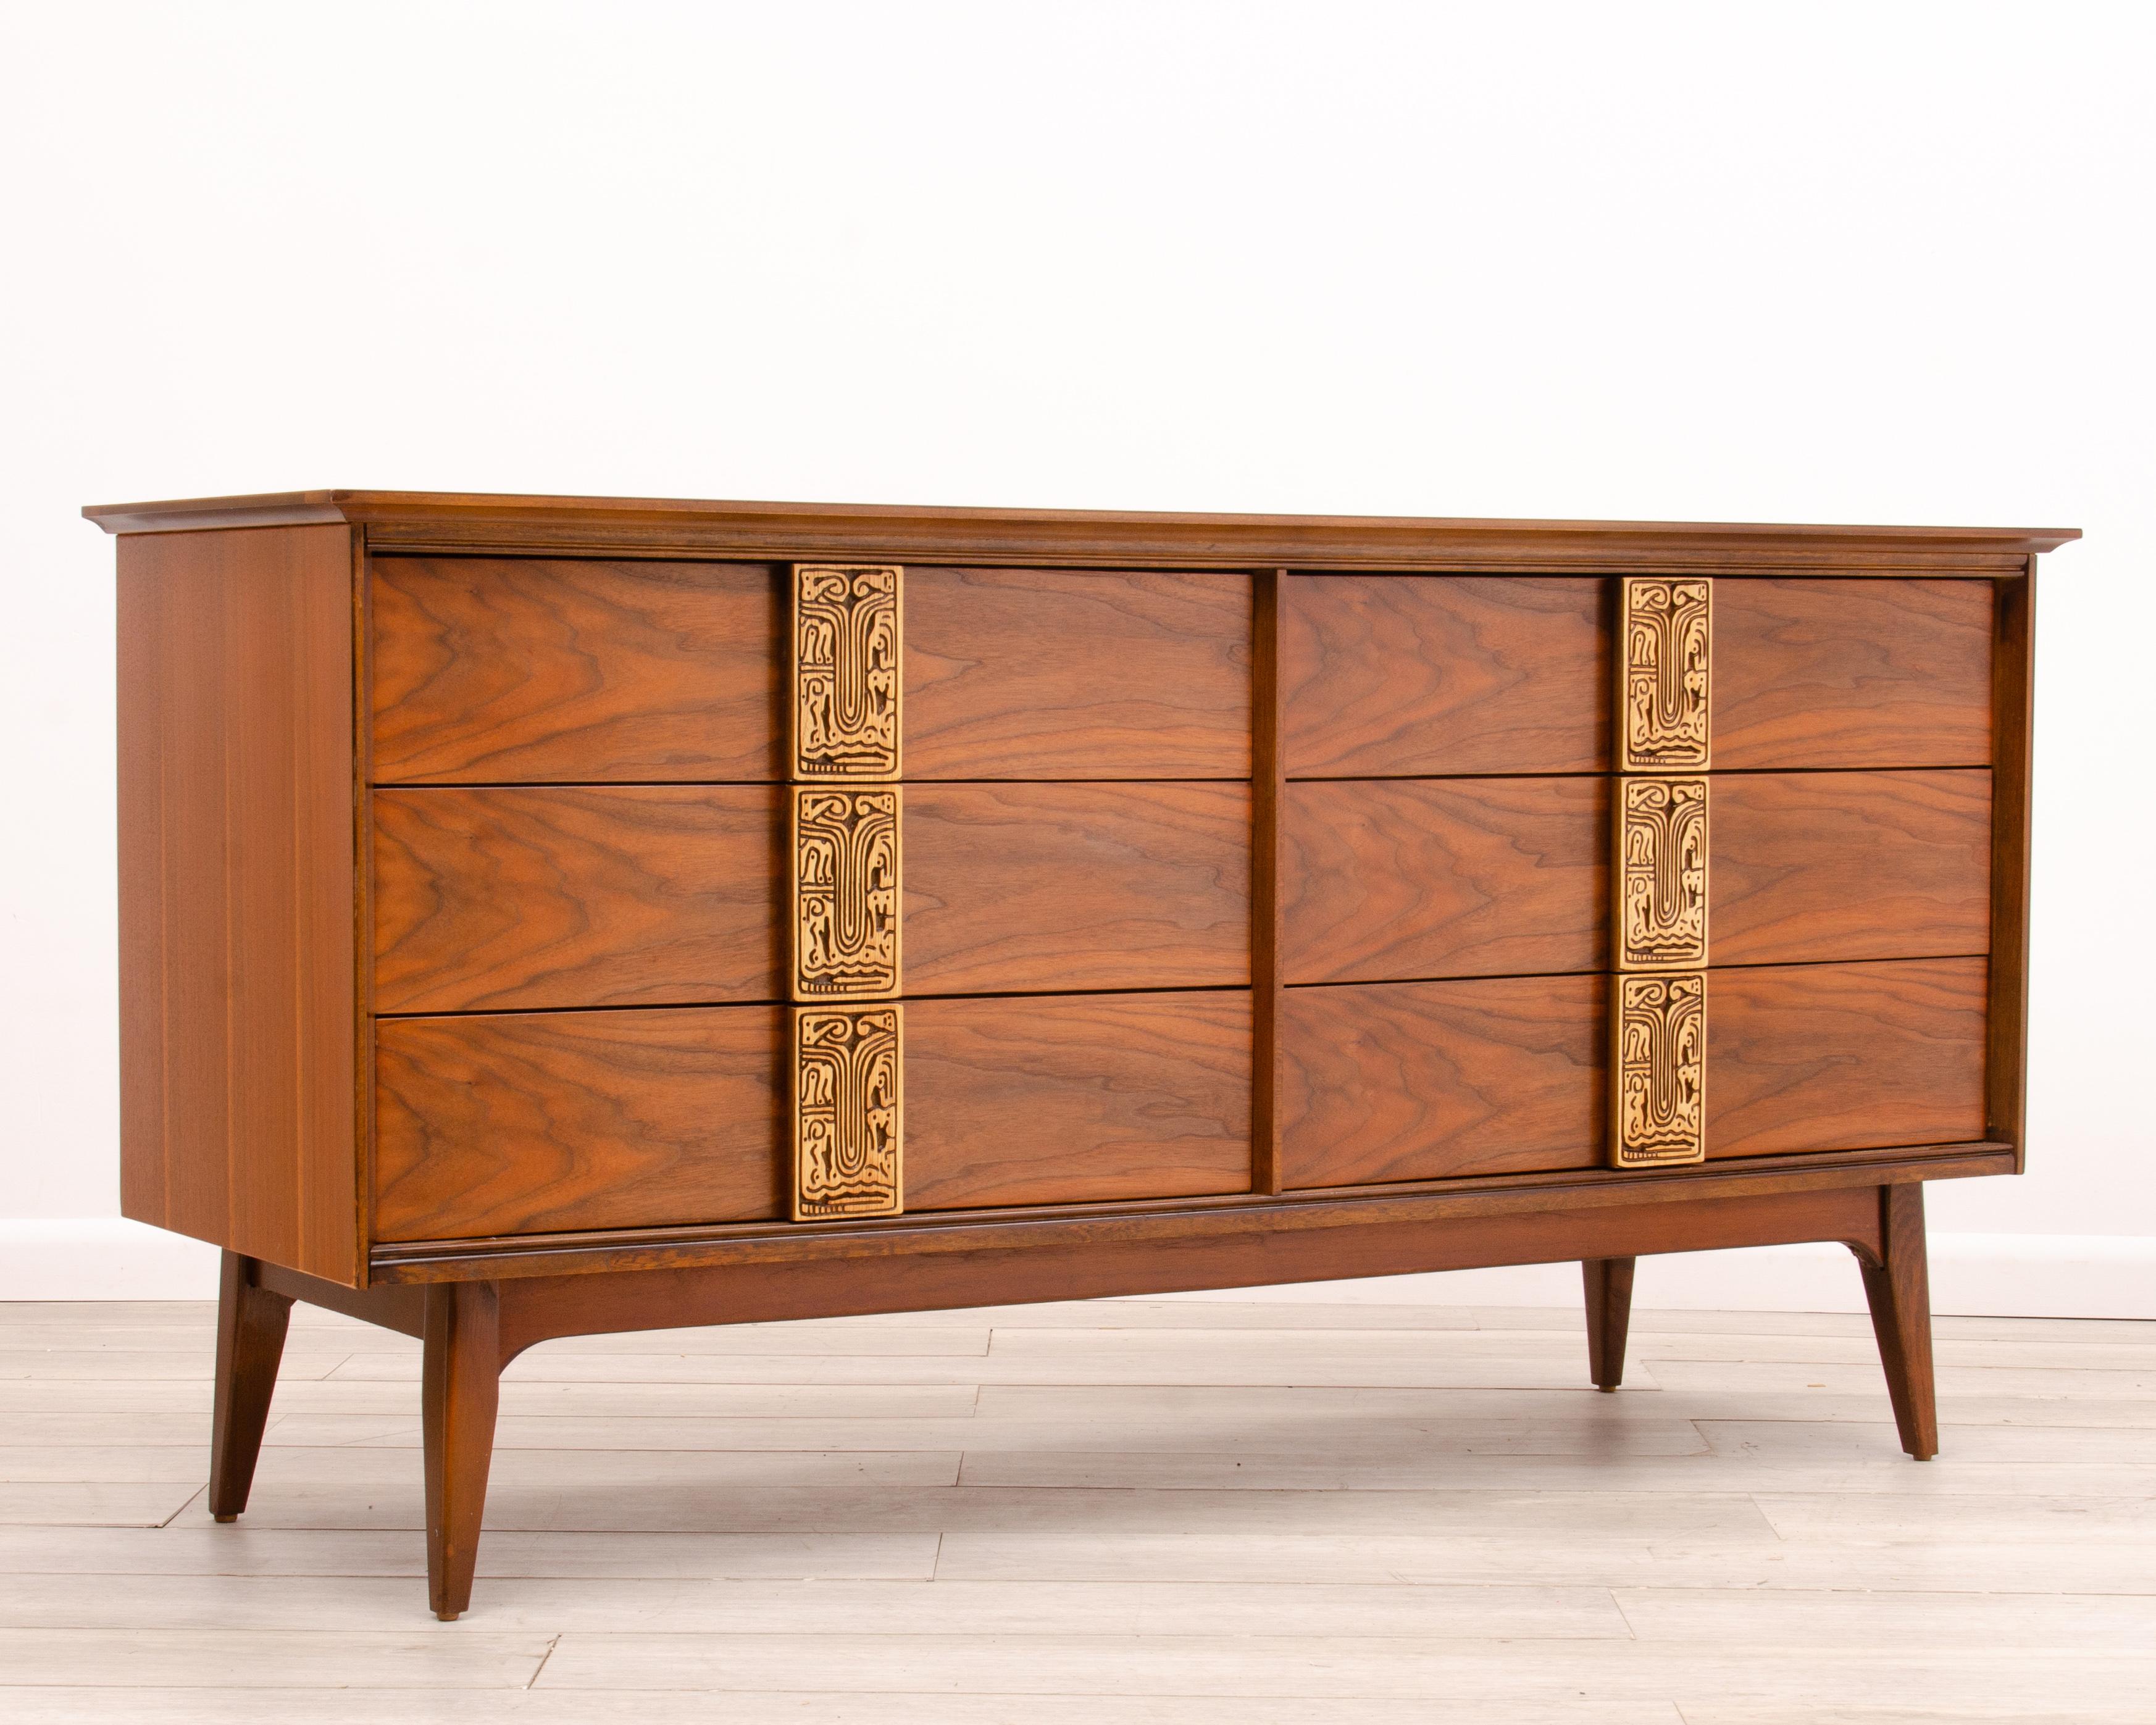 A Mid-Century Modern Bassett low dresser from the “Mayan” Collection. Circa 1960’s. The six drawer case has great size and proportion. The restored finish has more depth and clarity than the original factory finish.

The block carved tiki handles